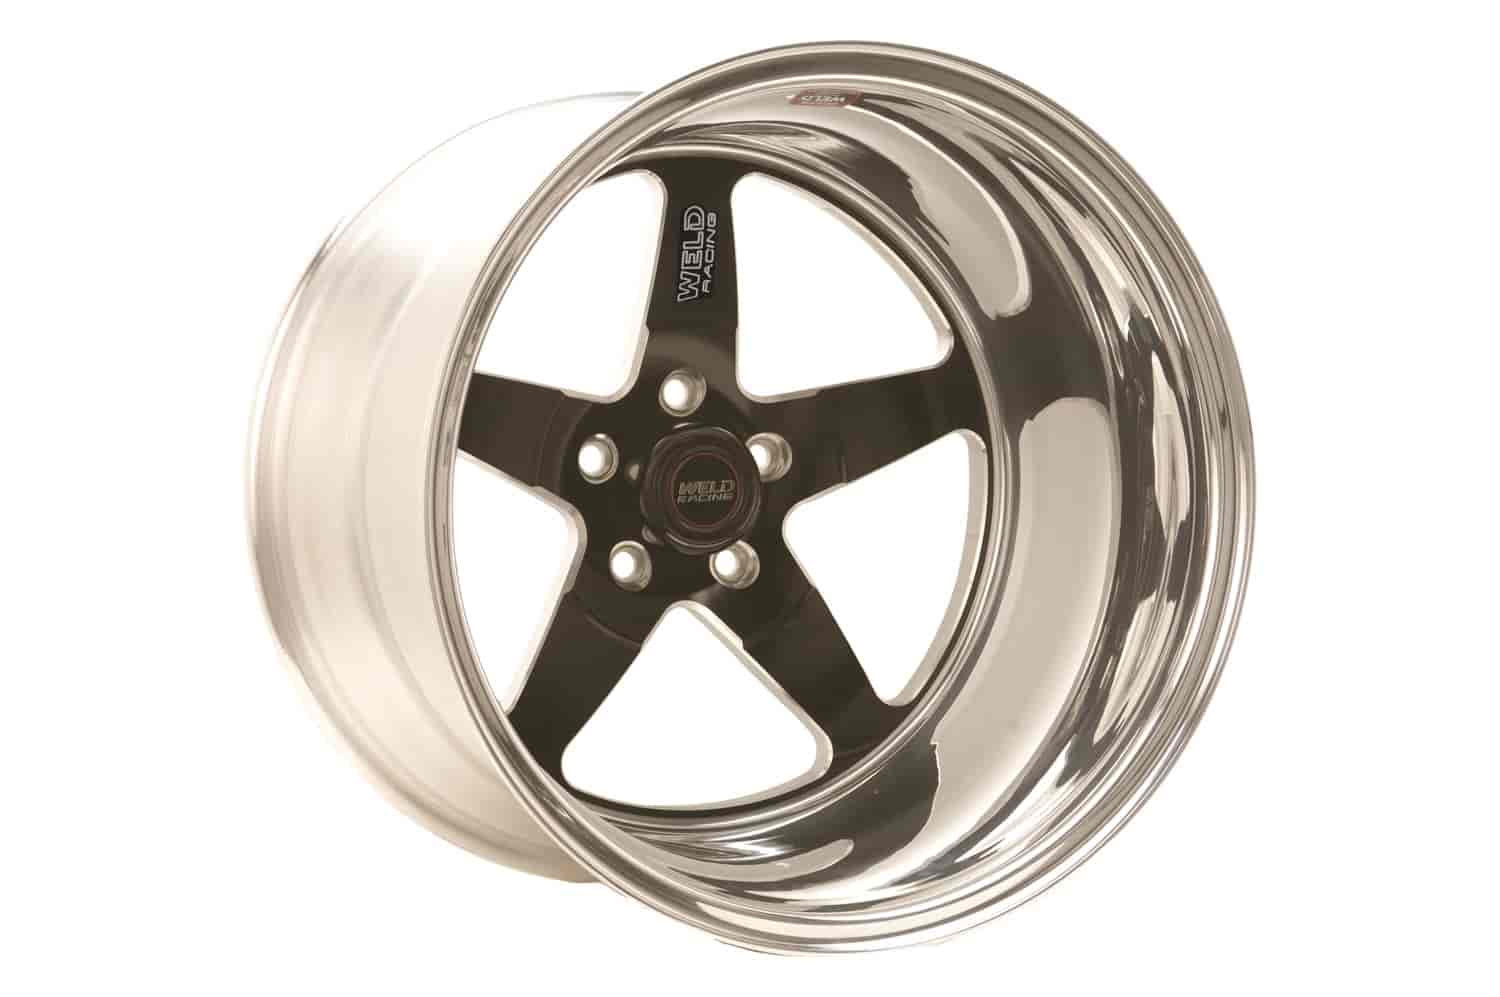 RT-S Series S71 Wheel Size: 15" x 5" Bolt Circle: 5 x 4-3/4" Back Space: 2-1/2"